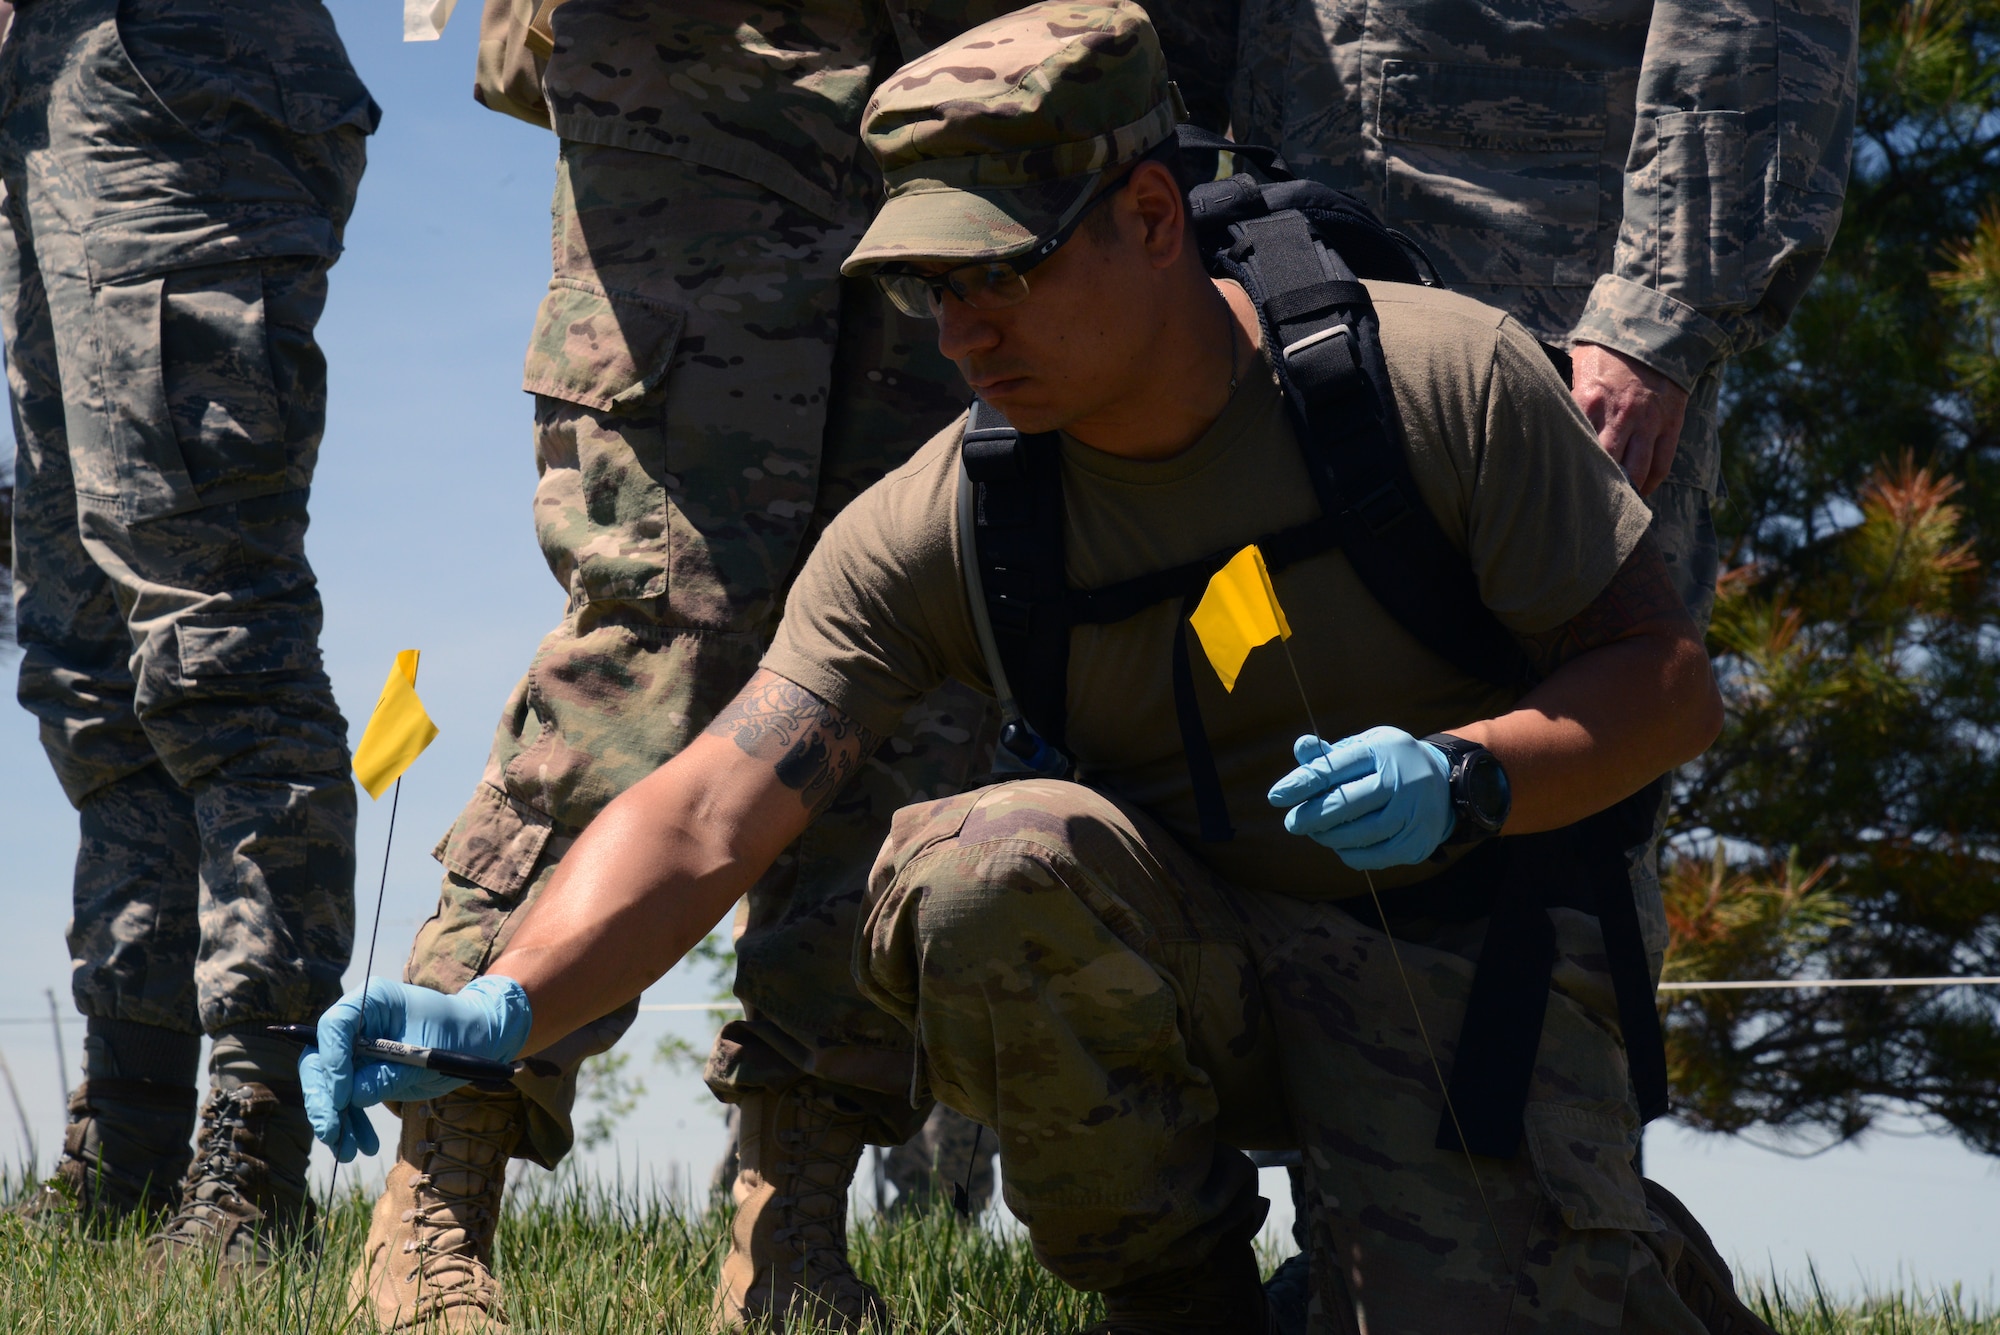 Tech. Sgt. Luis Escobar, 341st Force Support Squadron fitness and sports non-commissioned office in charge, participates in a search and recovery exercise June 12, 2019, at Malmstrom Air Force Base, Mont. The exercise included ensuring all identifications made are marked with flags, are recorded in a ledger, photographed, and latitude and longitude coordinates are documented. (U.S. Air Force photo by Staff Sgt. Magen M. Reeves)